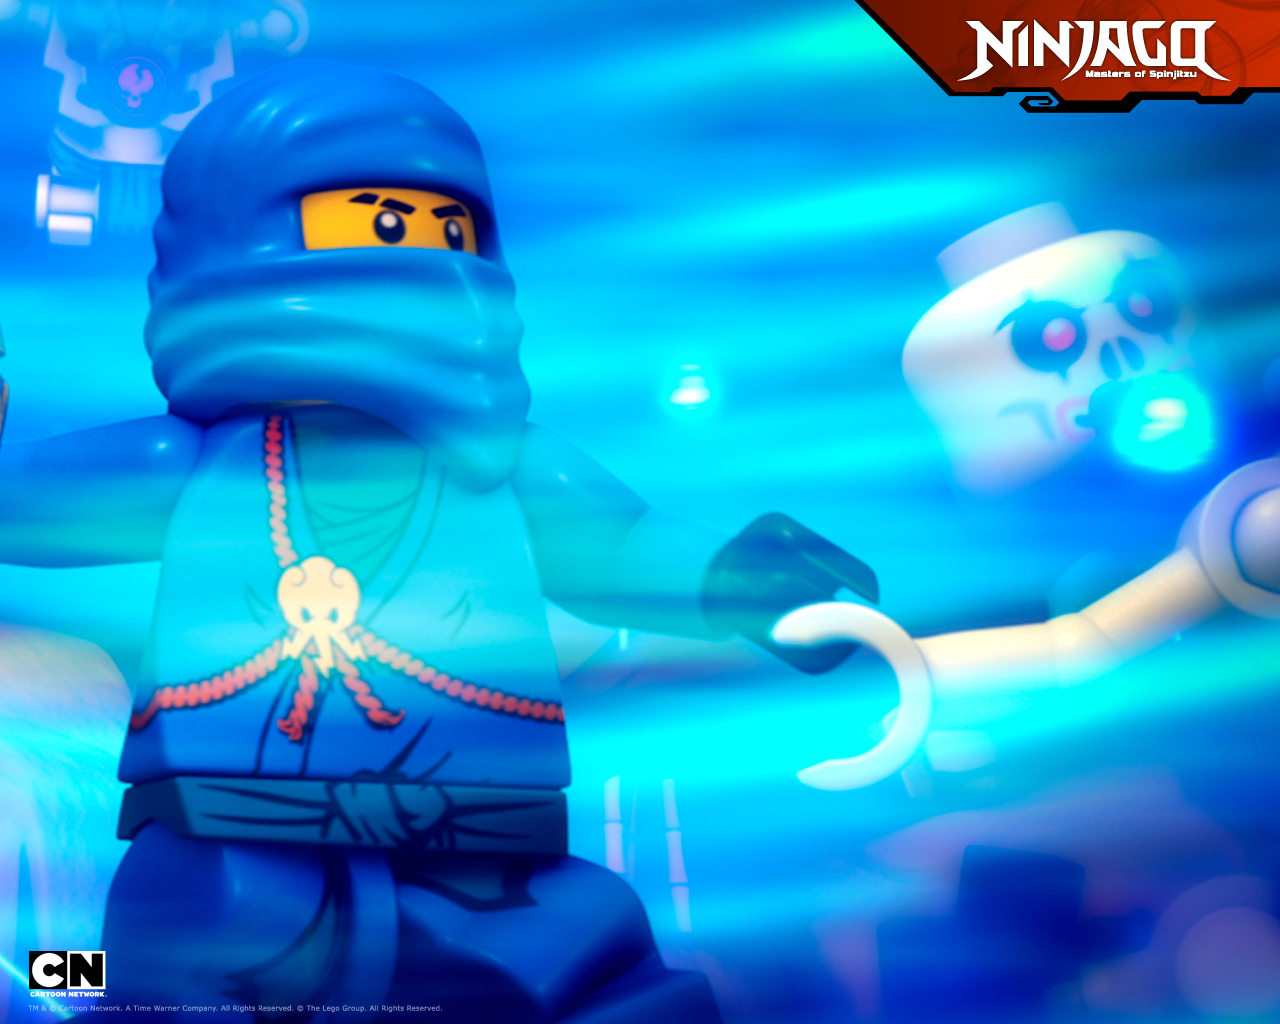 Ninjago Wallpaper Pictures In High Quality